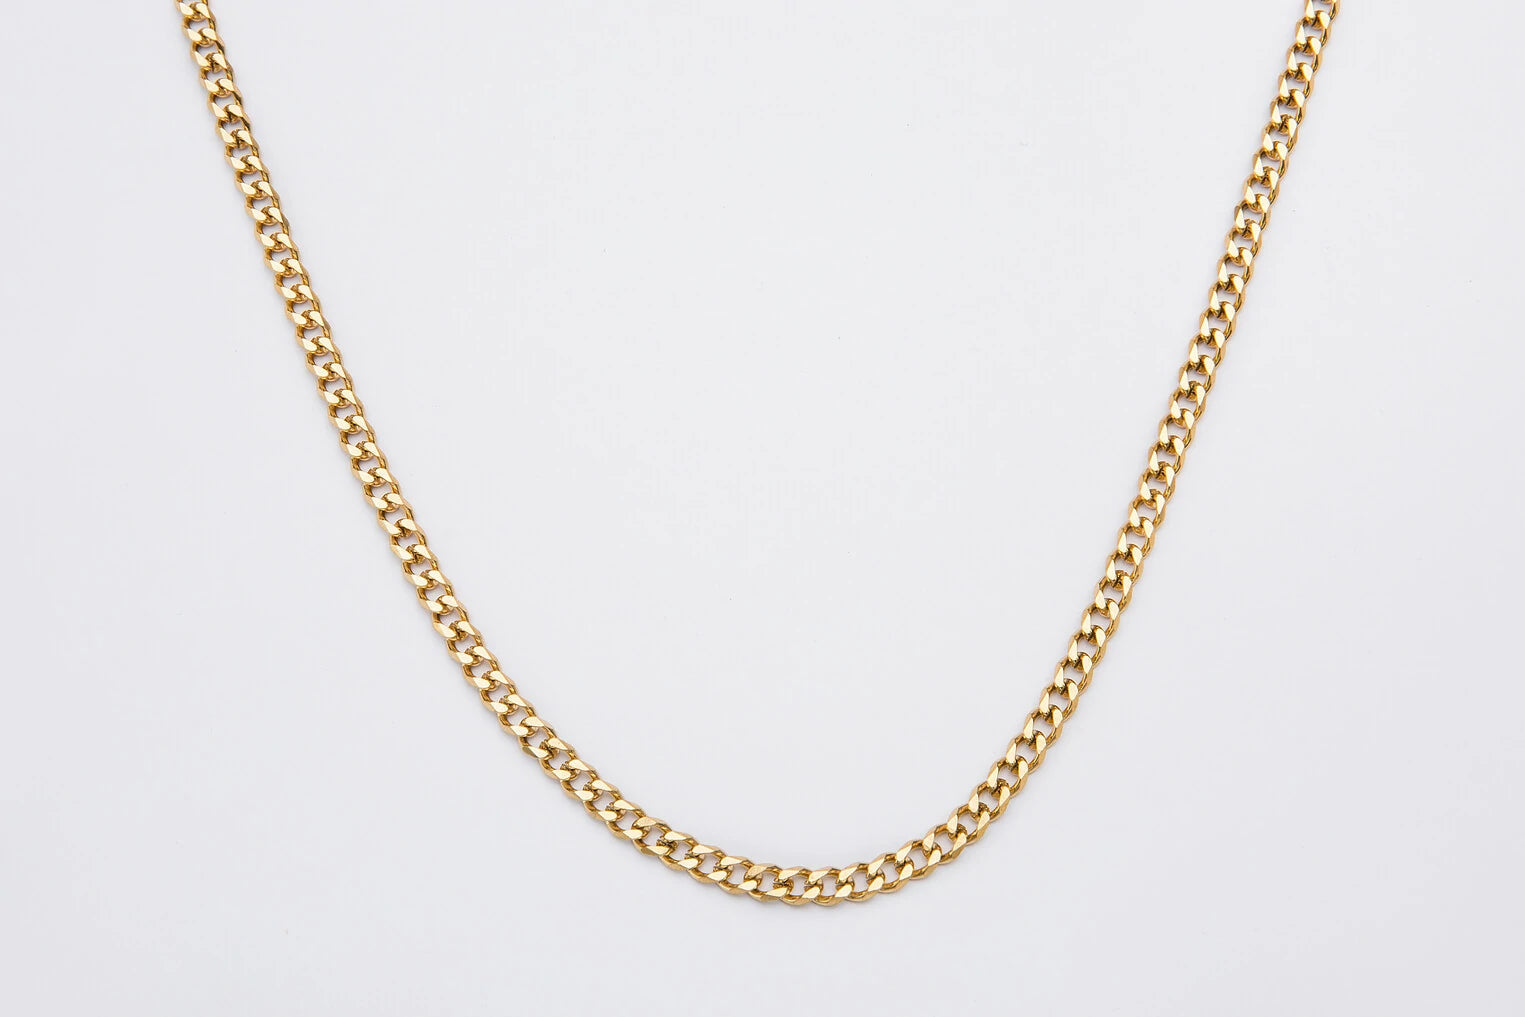 5mm Yellow Gold Cuban Link Chain on Neck for Men